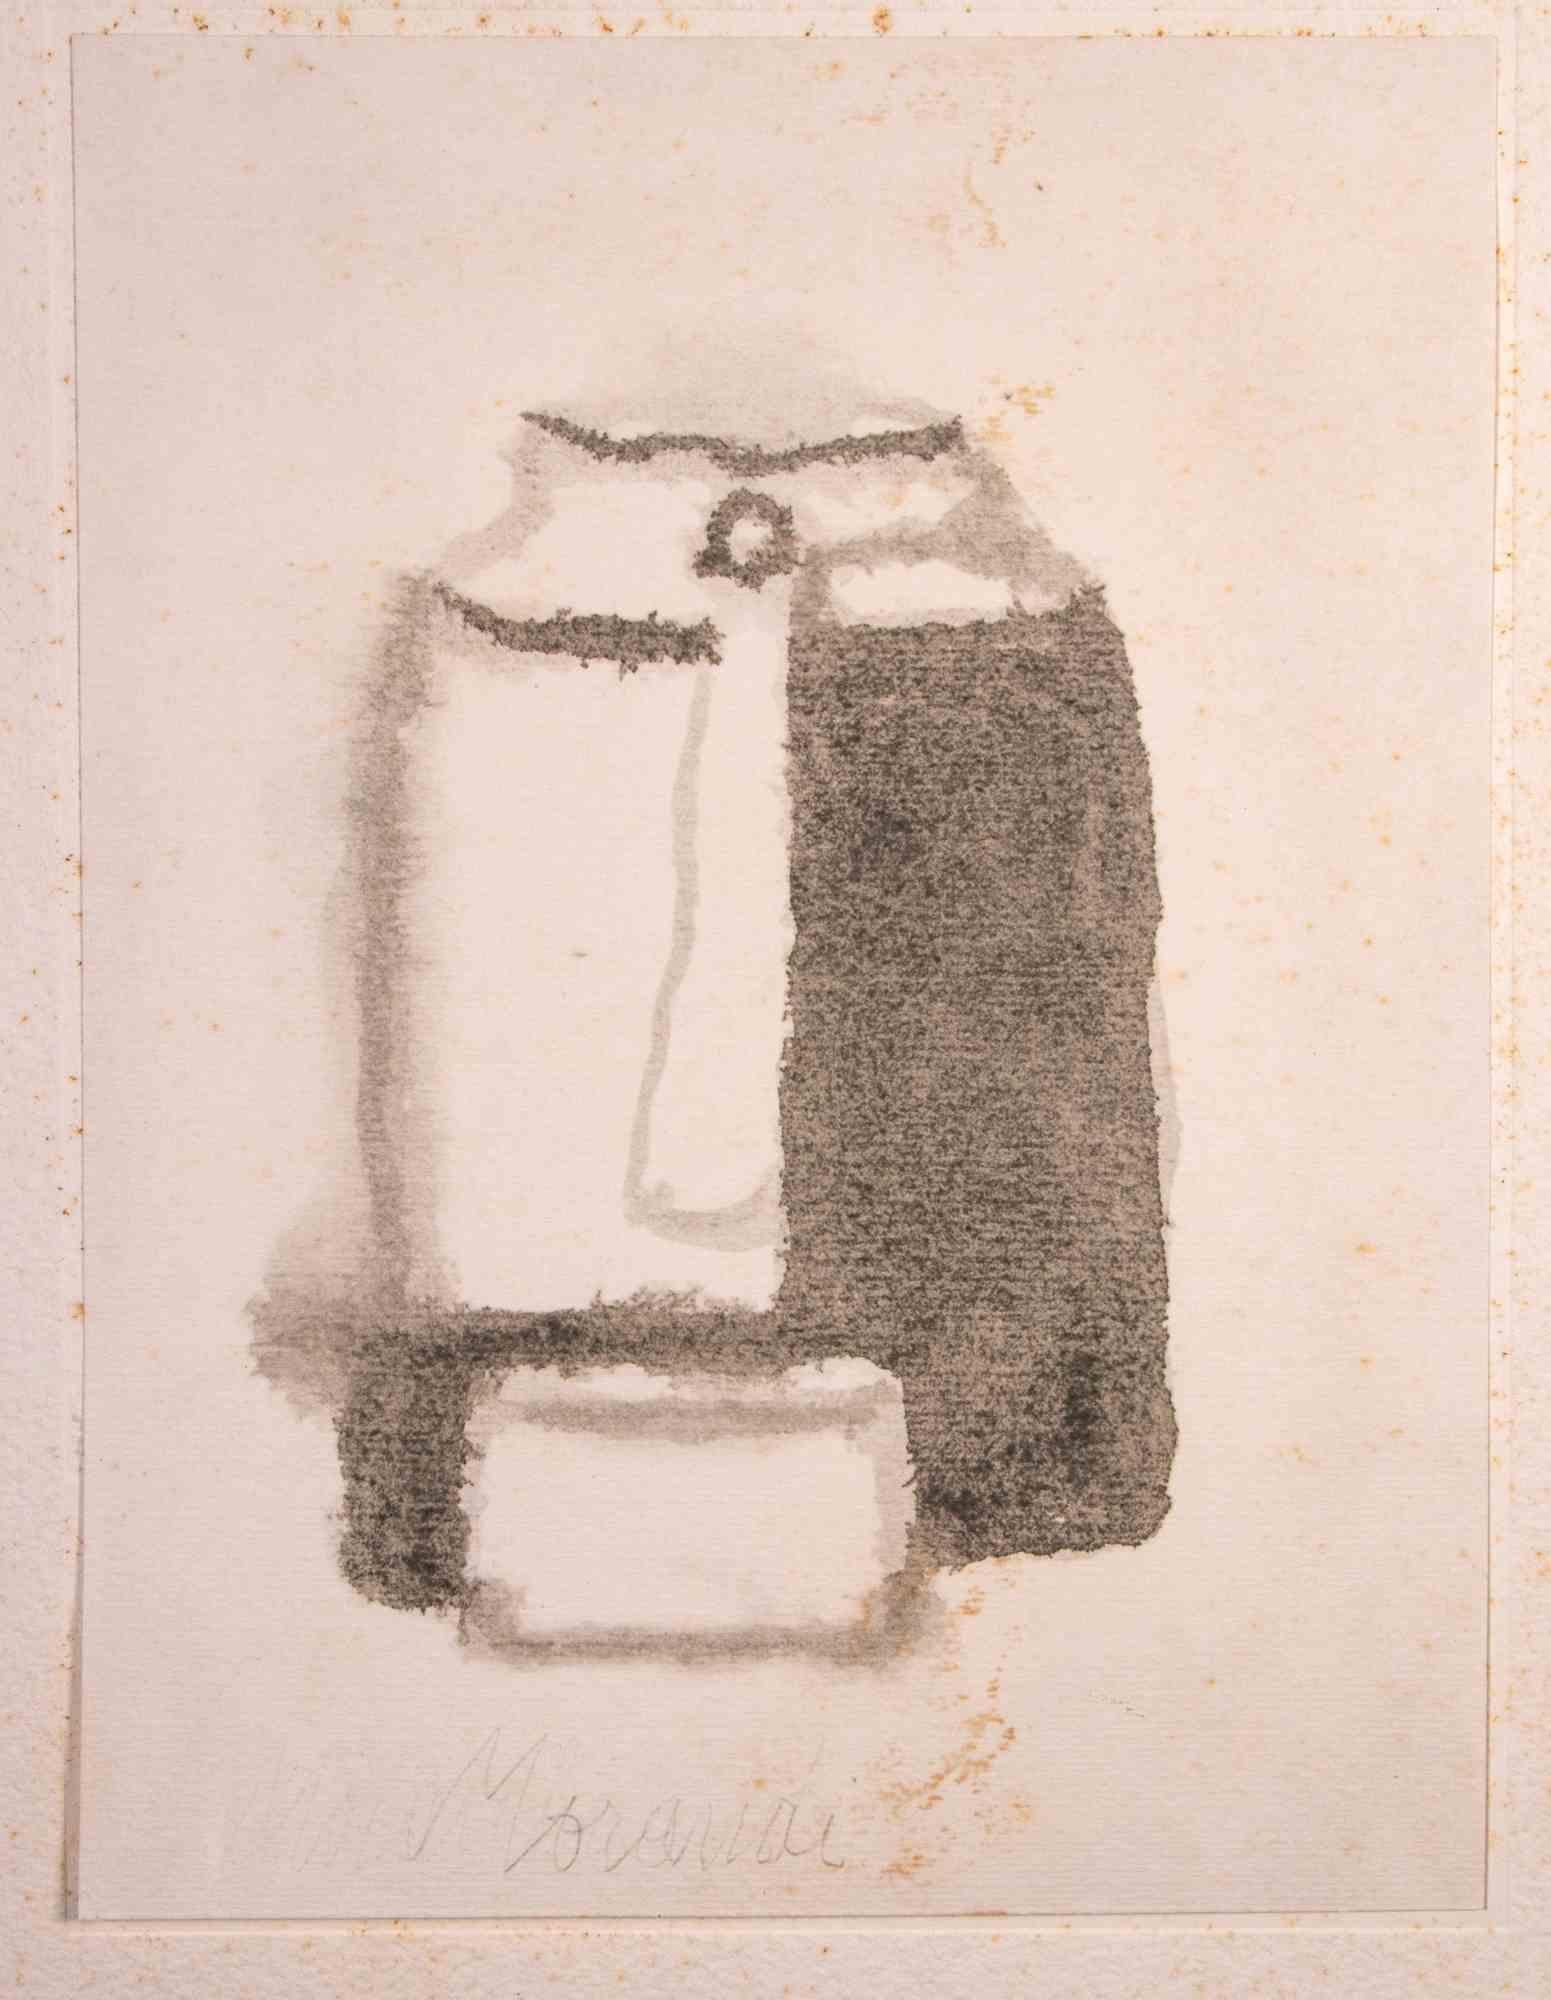 Still Life is an Original vintage offset print, reproducing the original watercolor by  Giorgio Morandi in 1973.

Signature and date by the artist is perfectly reproduced on plate.

Printed in Giorgio Upiglio's Press. At the end of the print run,